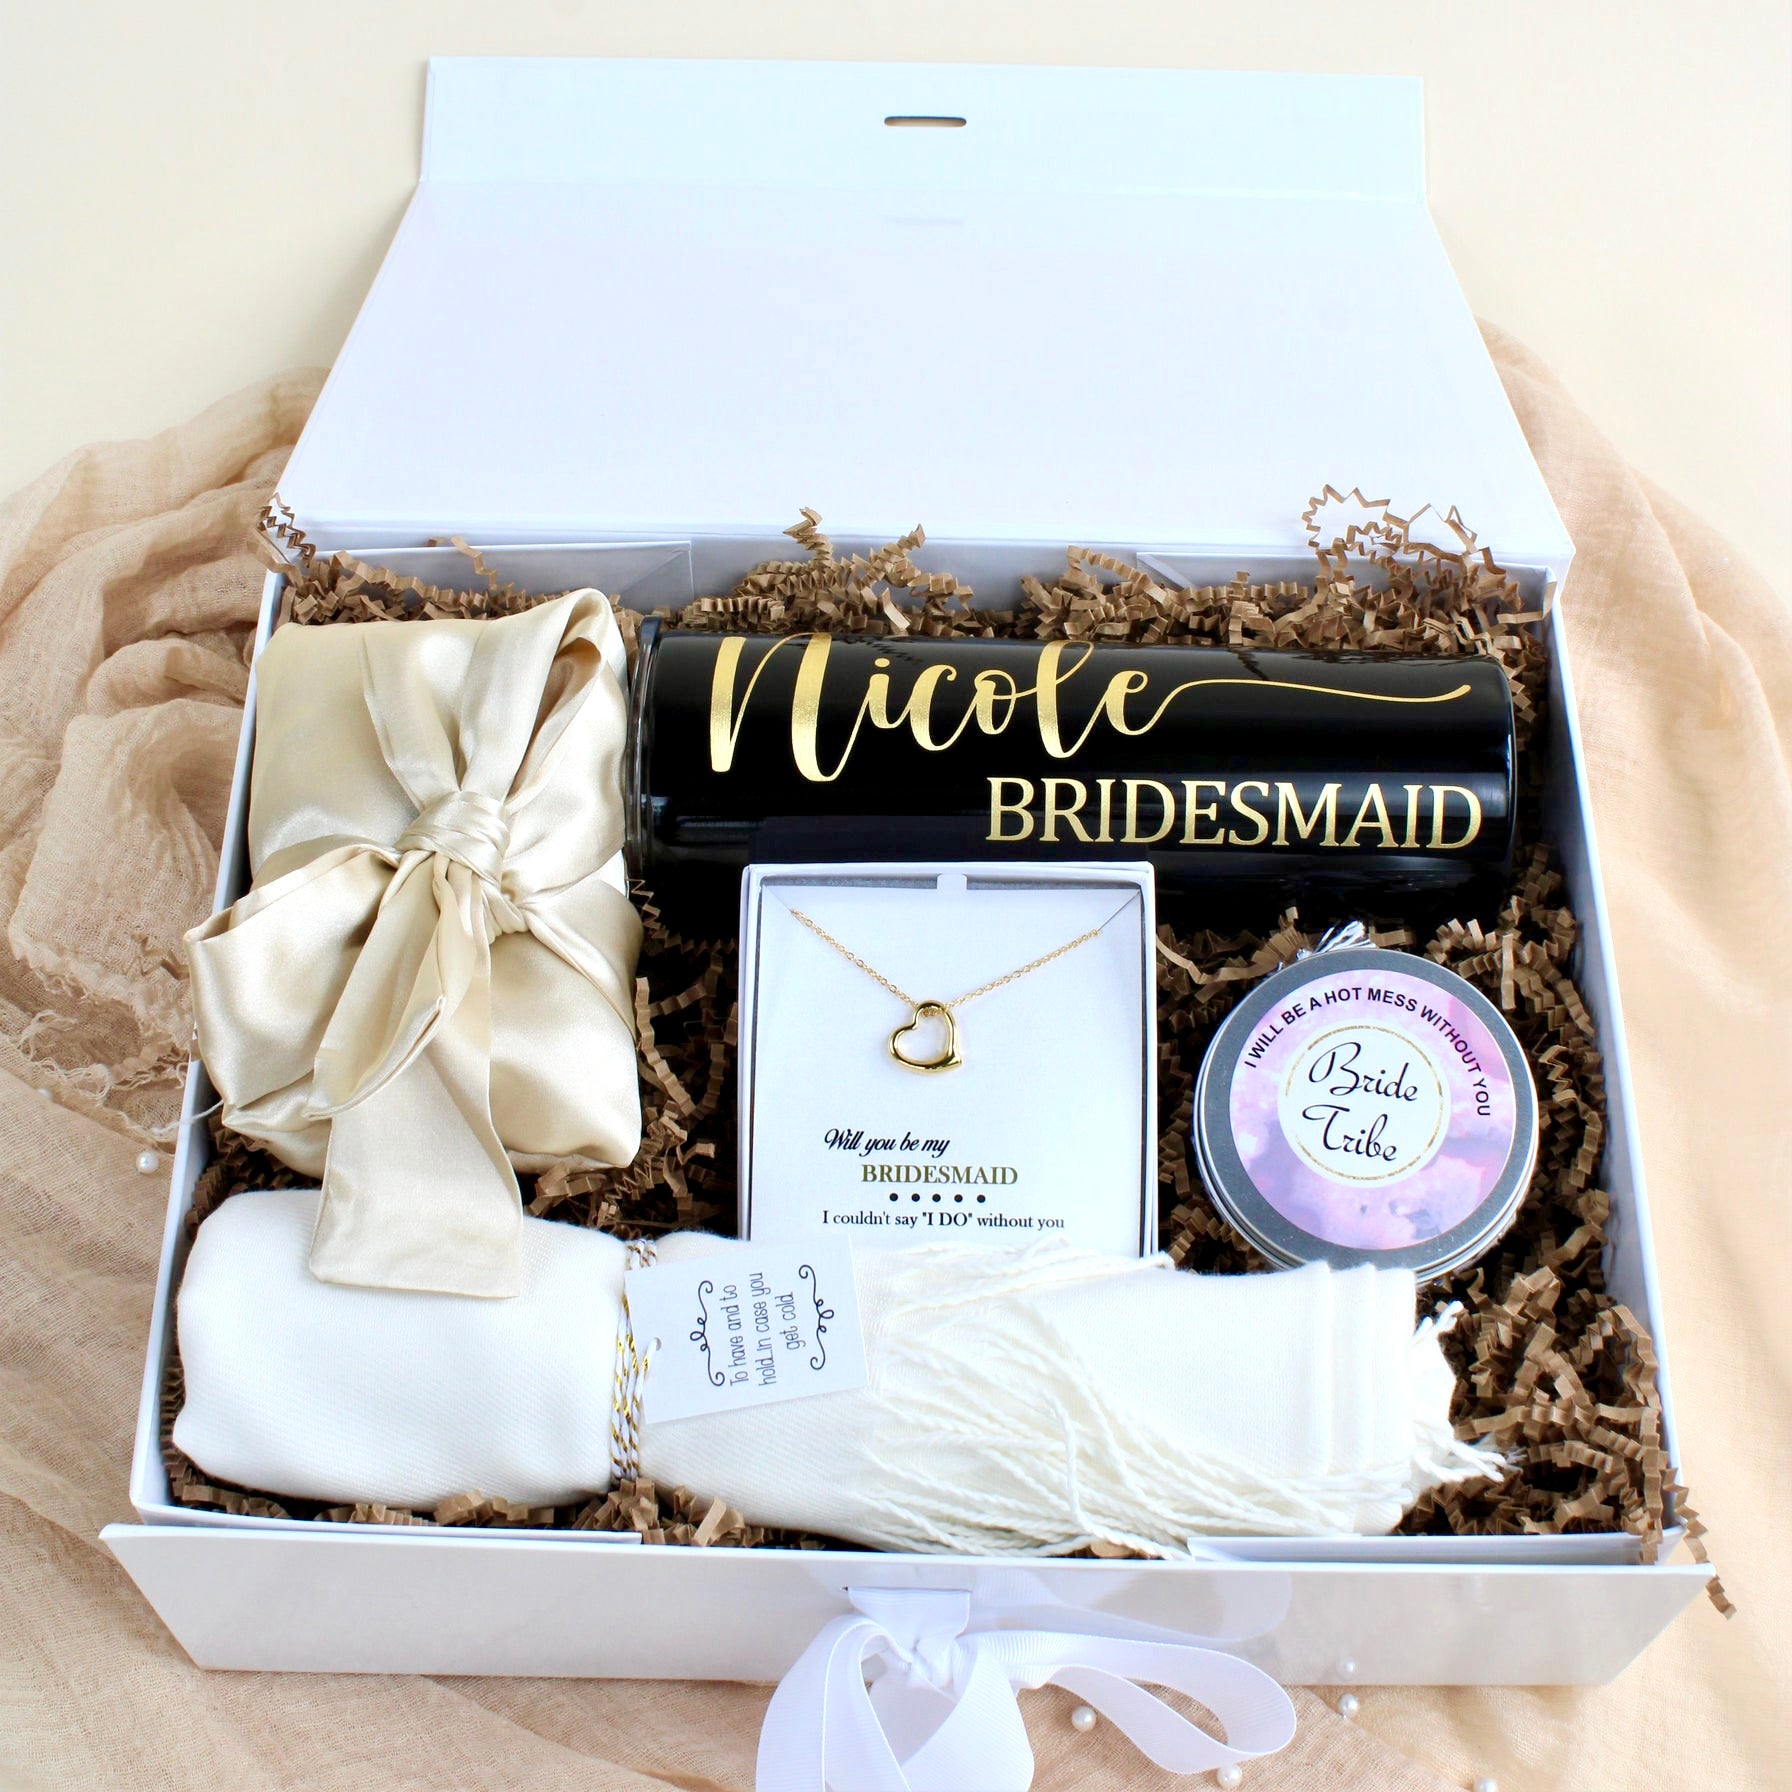 15 Great Engagement Gifts Boxes for Him & Her - Bridesmaid Gifts Boutique